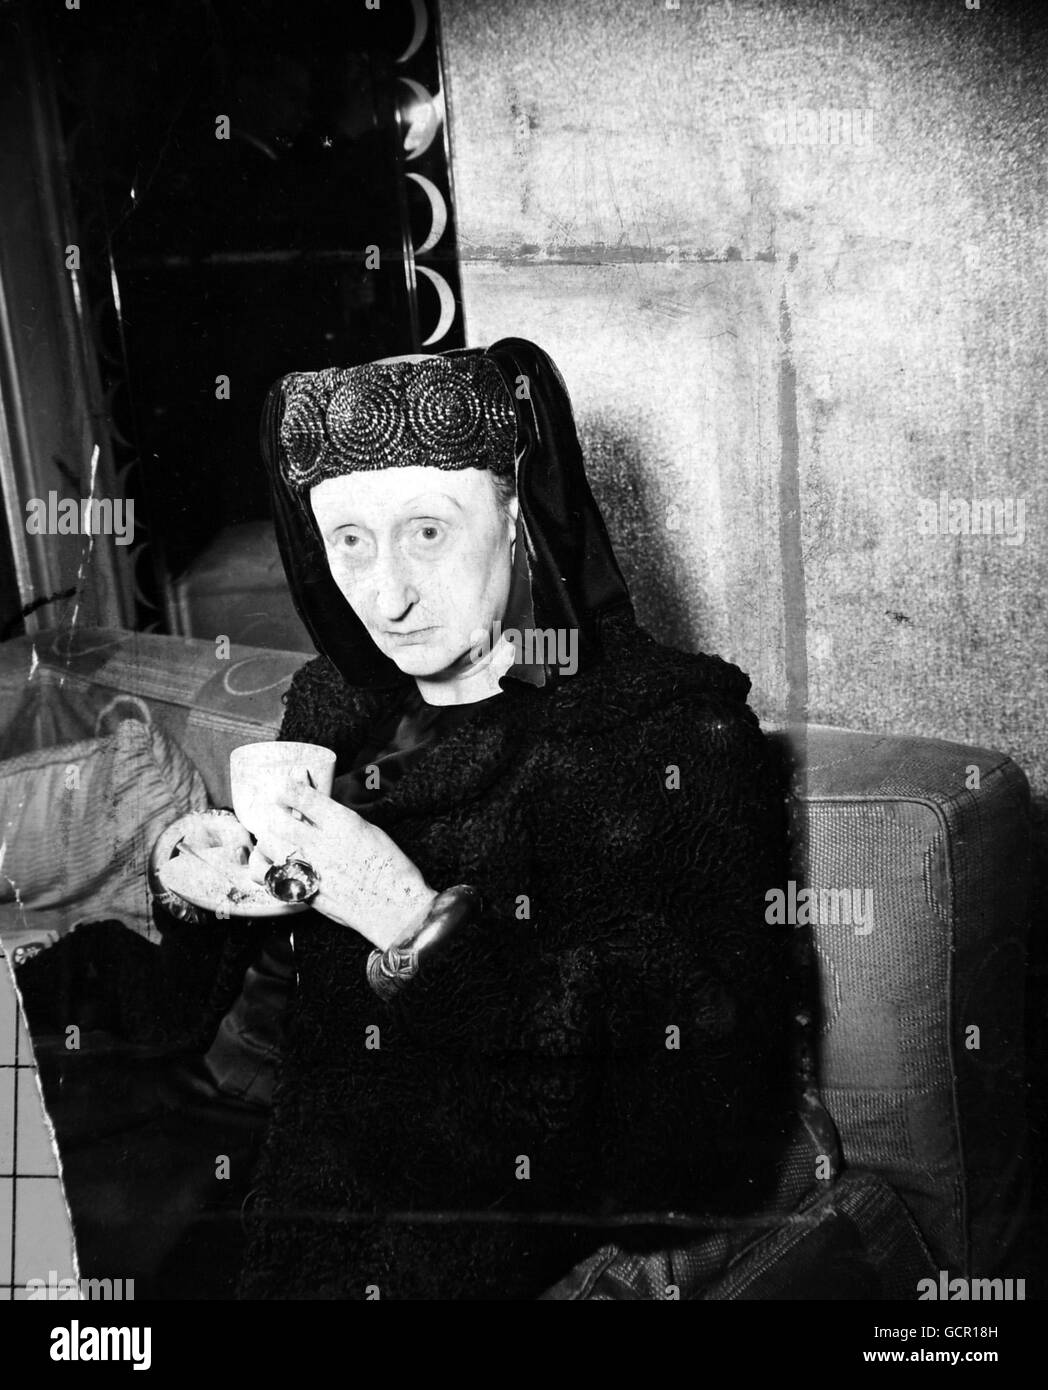 Dr. Edith Sitwell (pictured here), member of the famous literary family, becomes a DBE (Dame of the Order of the British Empire) in the Queen's birthday Honours. Dr. Sitwell, sister of Sir Osbert Sitwell and Sacheverell Sitwell, is an historian, novelist, script writer and poetess. She recently visited Hollywood, where she worked on the film script of 'Fanfare for Elizabeth', her book on Henry VIII and Ann Boleyn. An individualist of uncertain age (she has admitted to 66, 8 and 78). Dr. Sitwell favours Plantagenet style headdress with flowing drapery, ornate rings and bracelets. June 9th 1954 Stock Photo